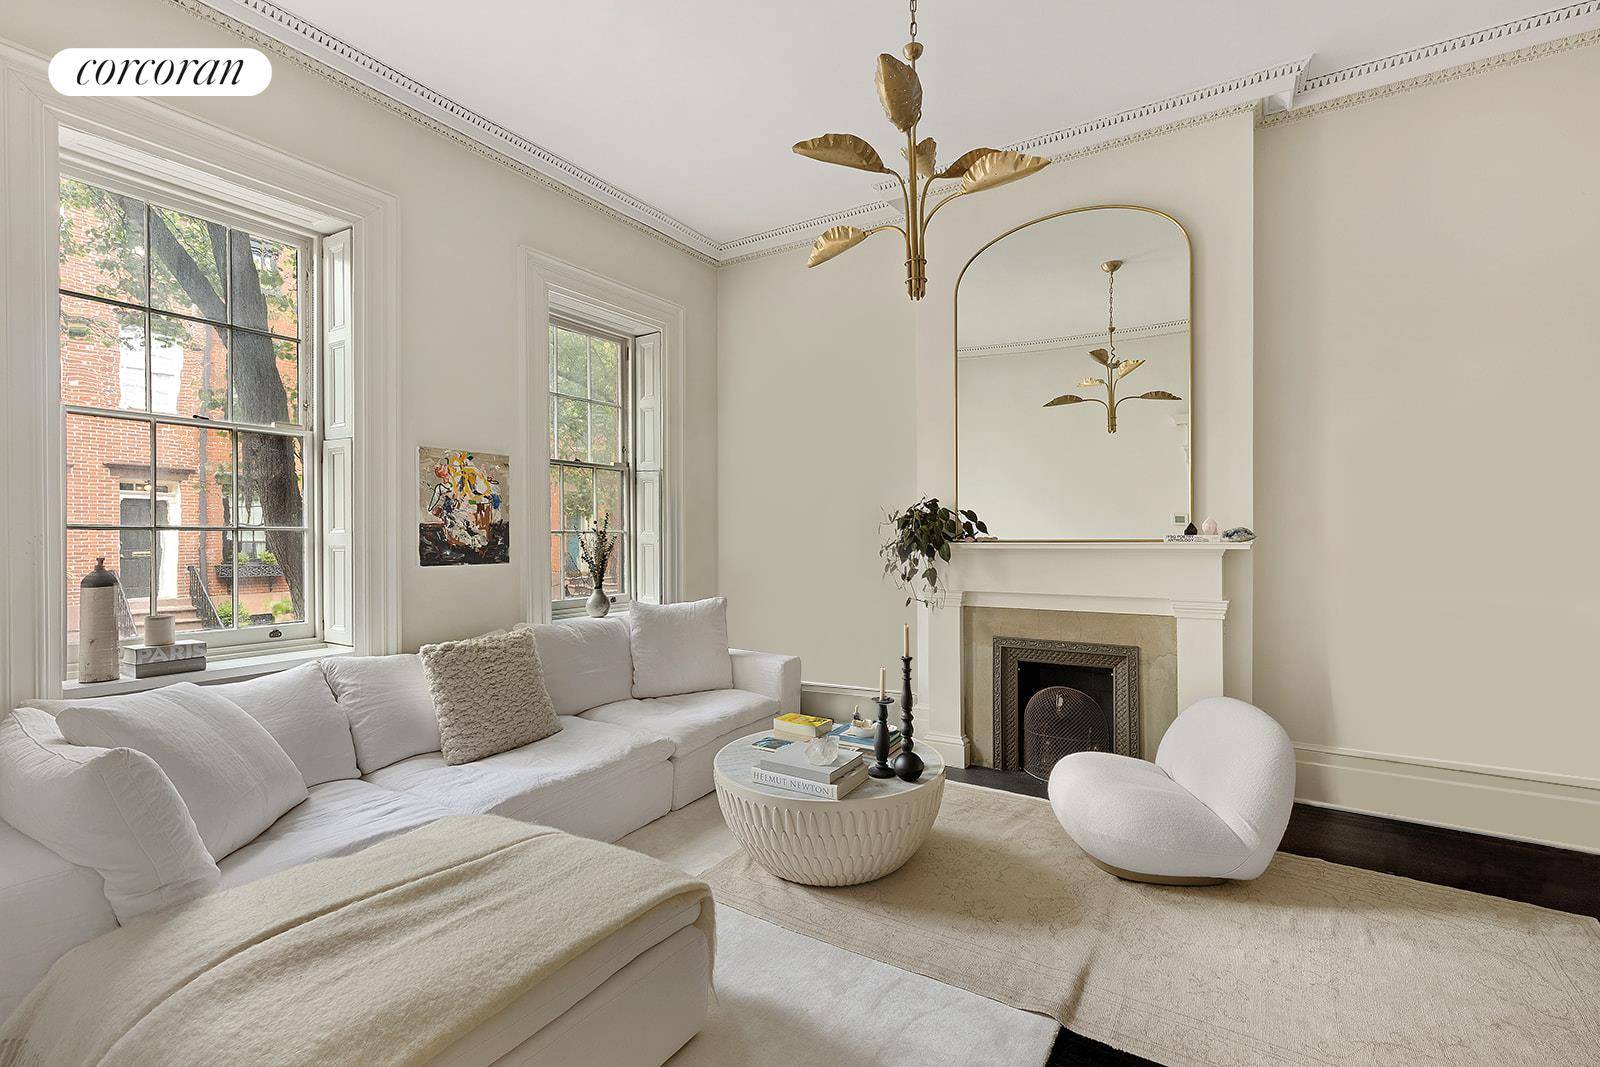 An exquisite West Village home rarely available and quite remarkable, meticulously renovated to the highest degree, combining classic New York living with European sensibility and refinement.